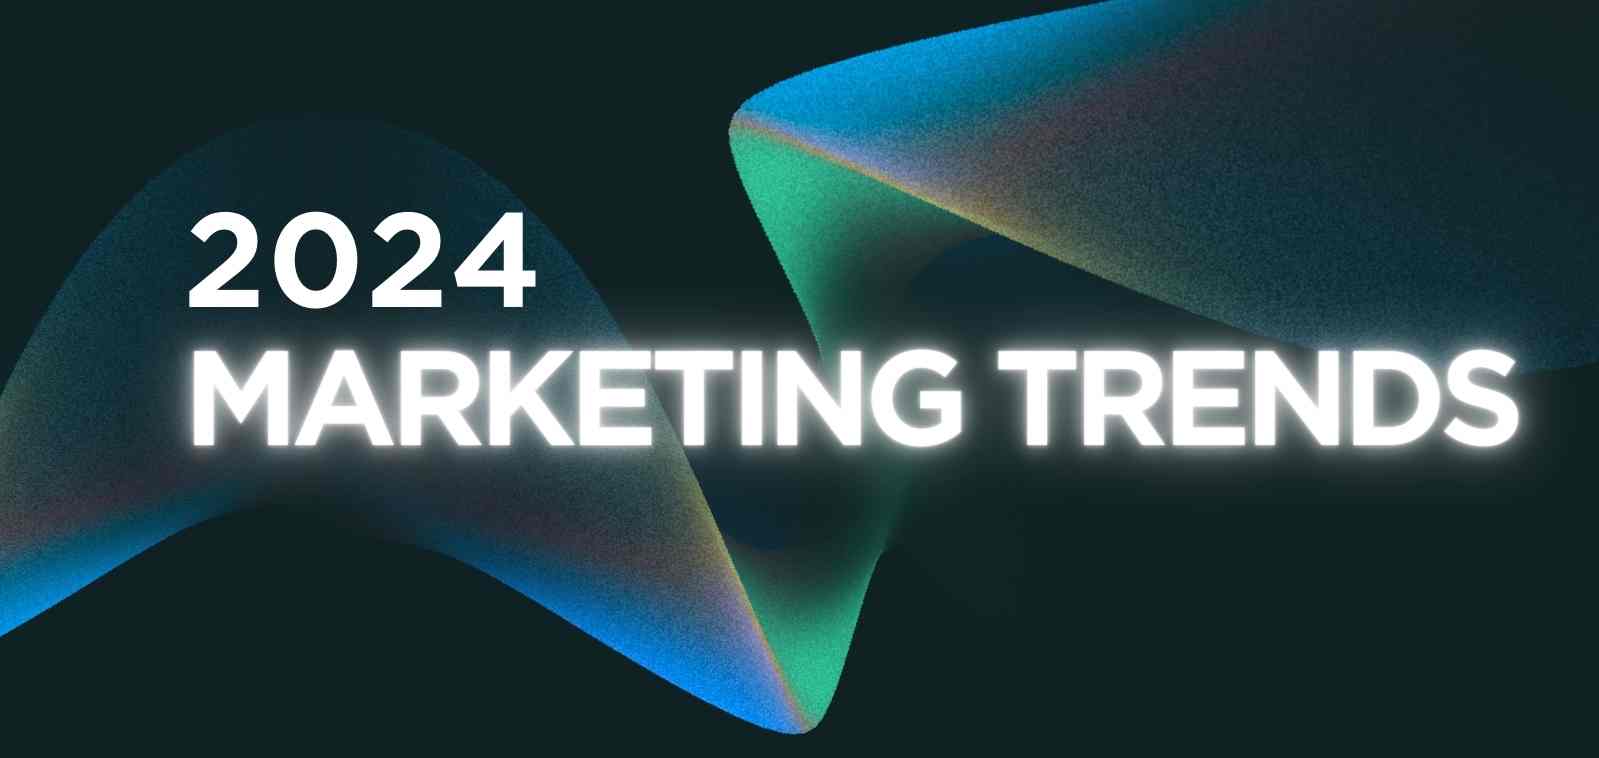 2024 Marketing Trends: What to Expect in the Digital World